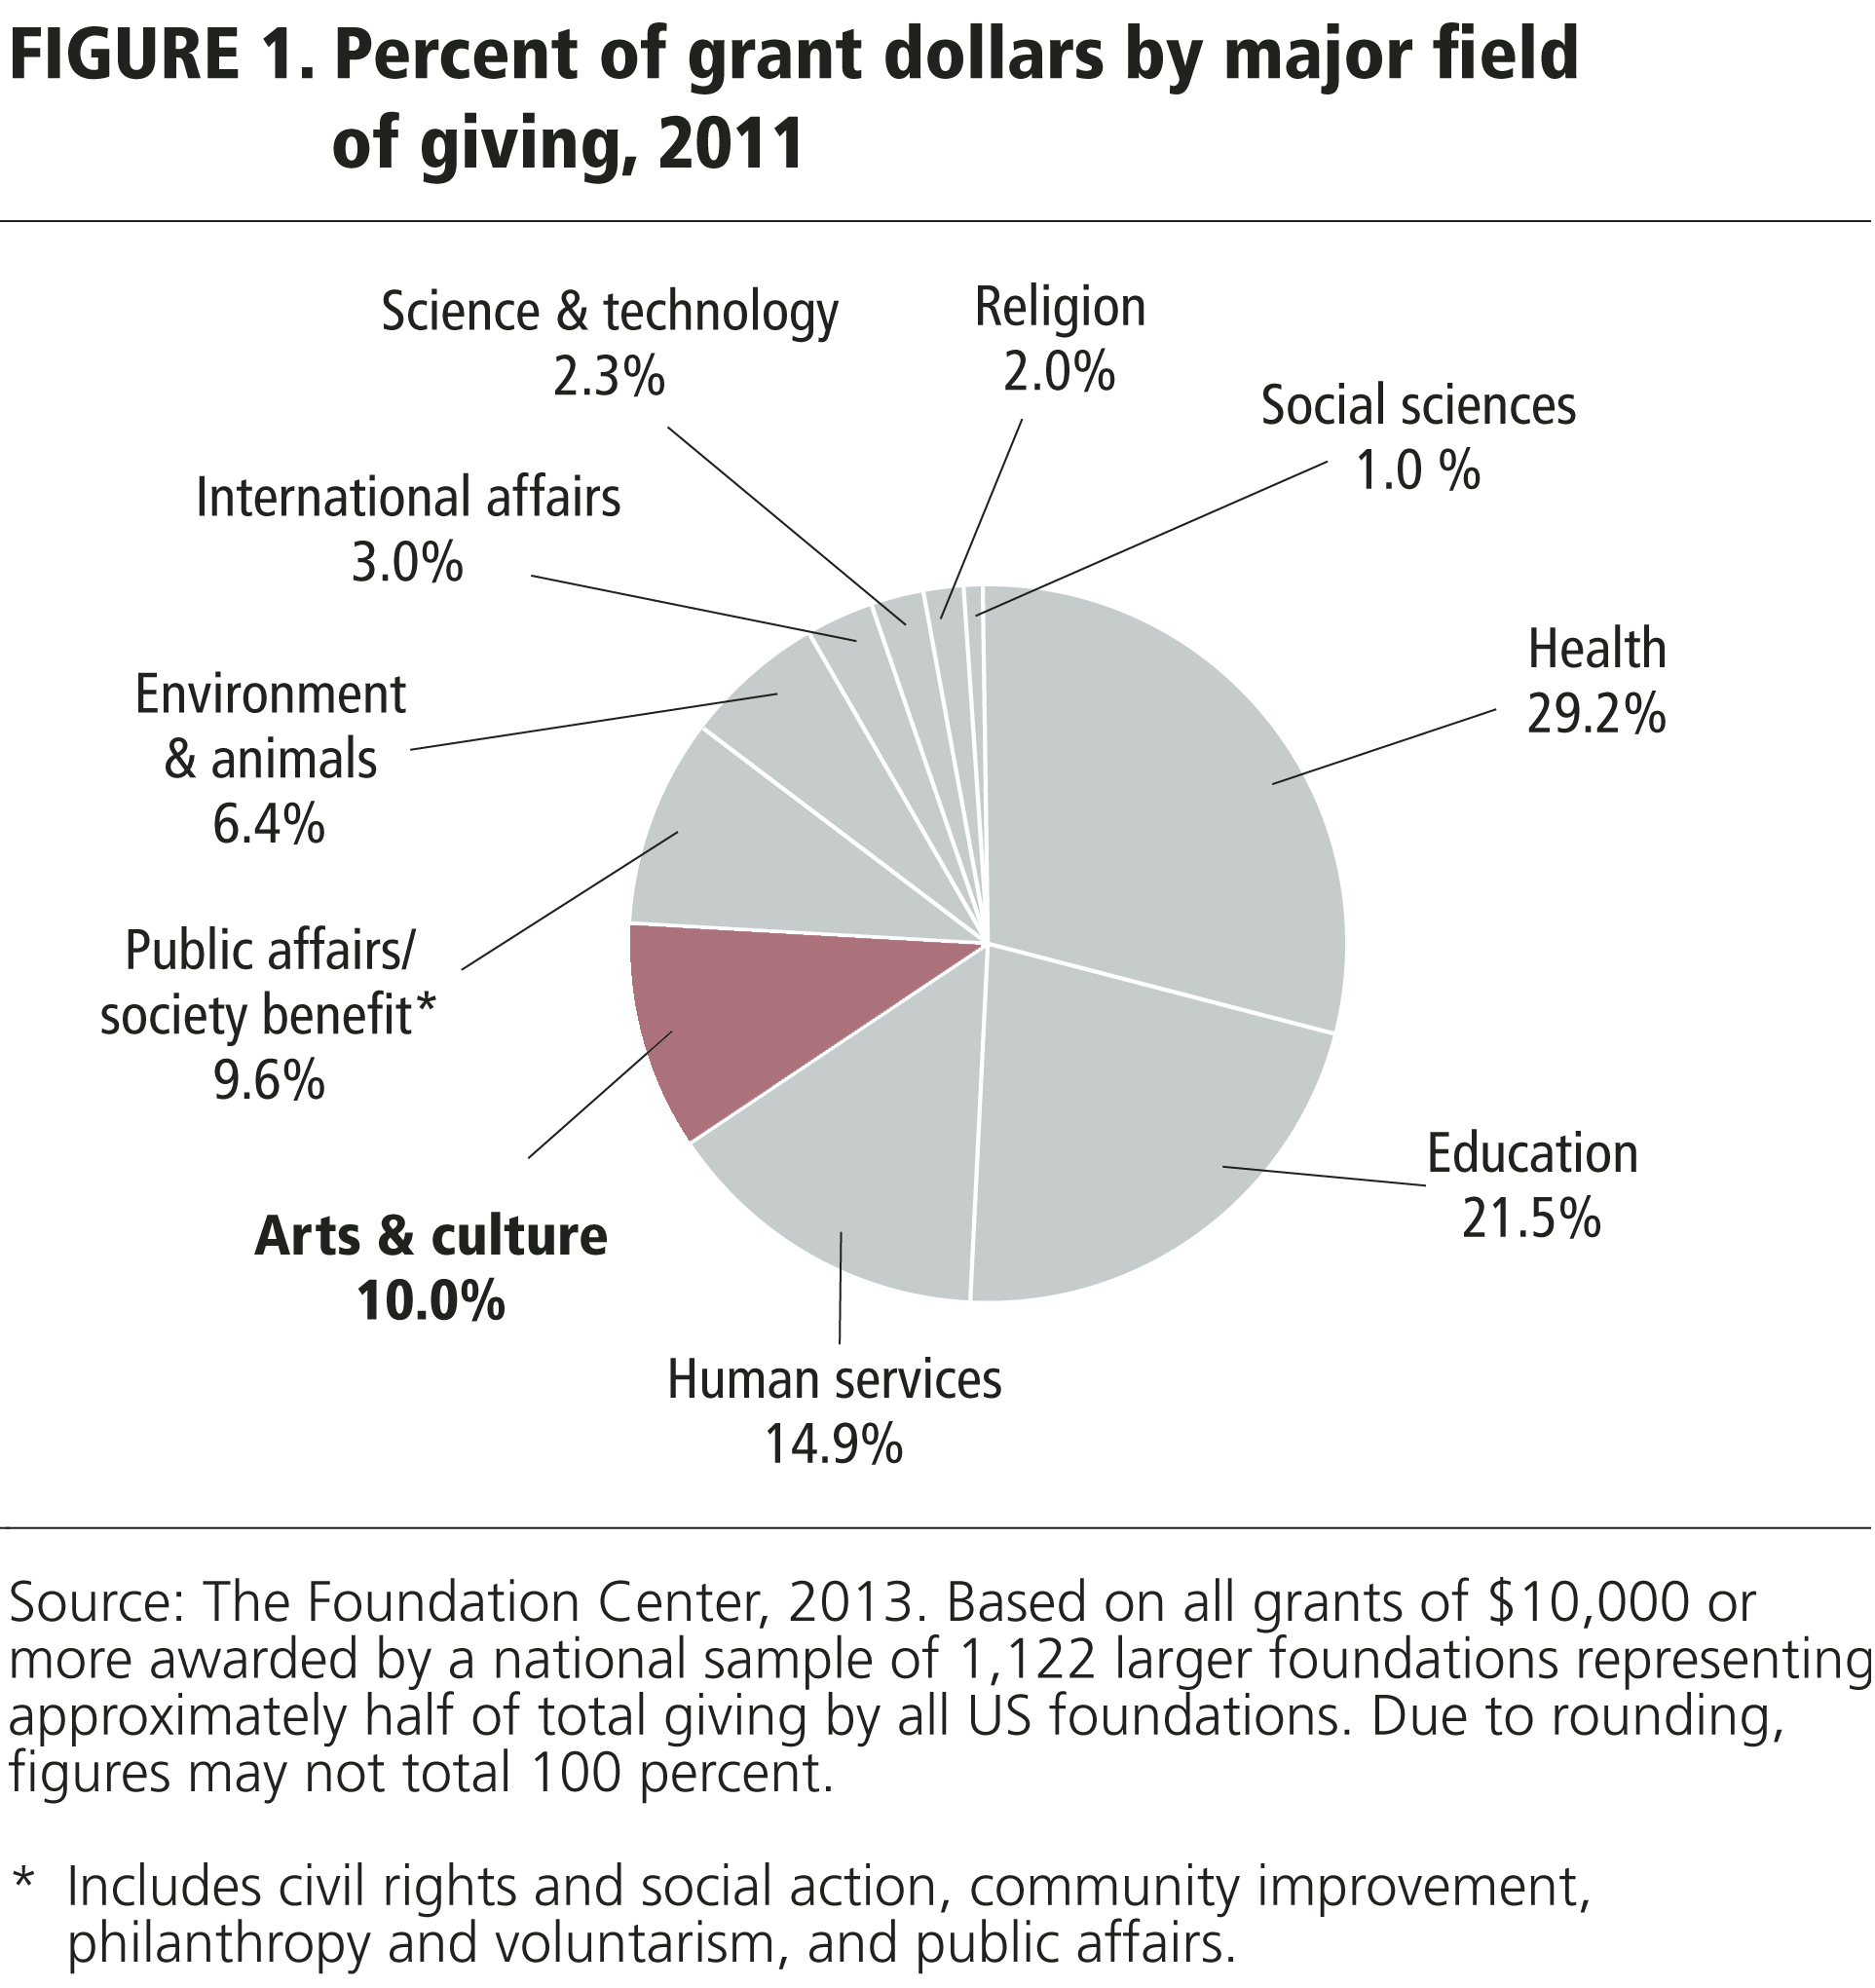 Figure 1. Percent of grant dollars by major field of giving, 2011